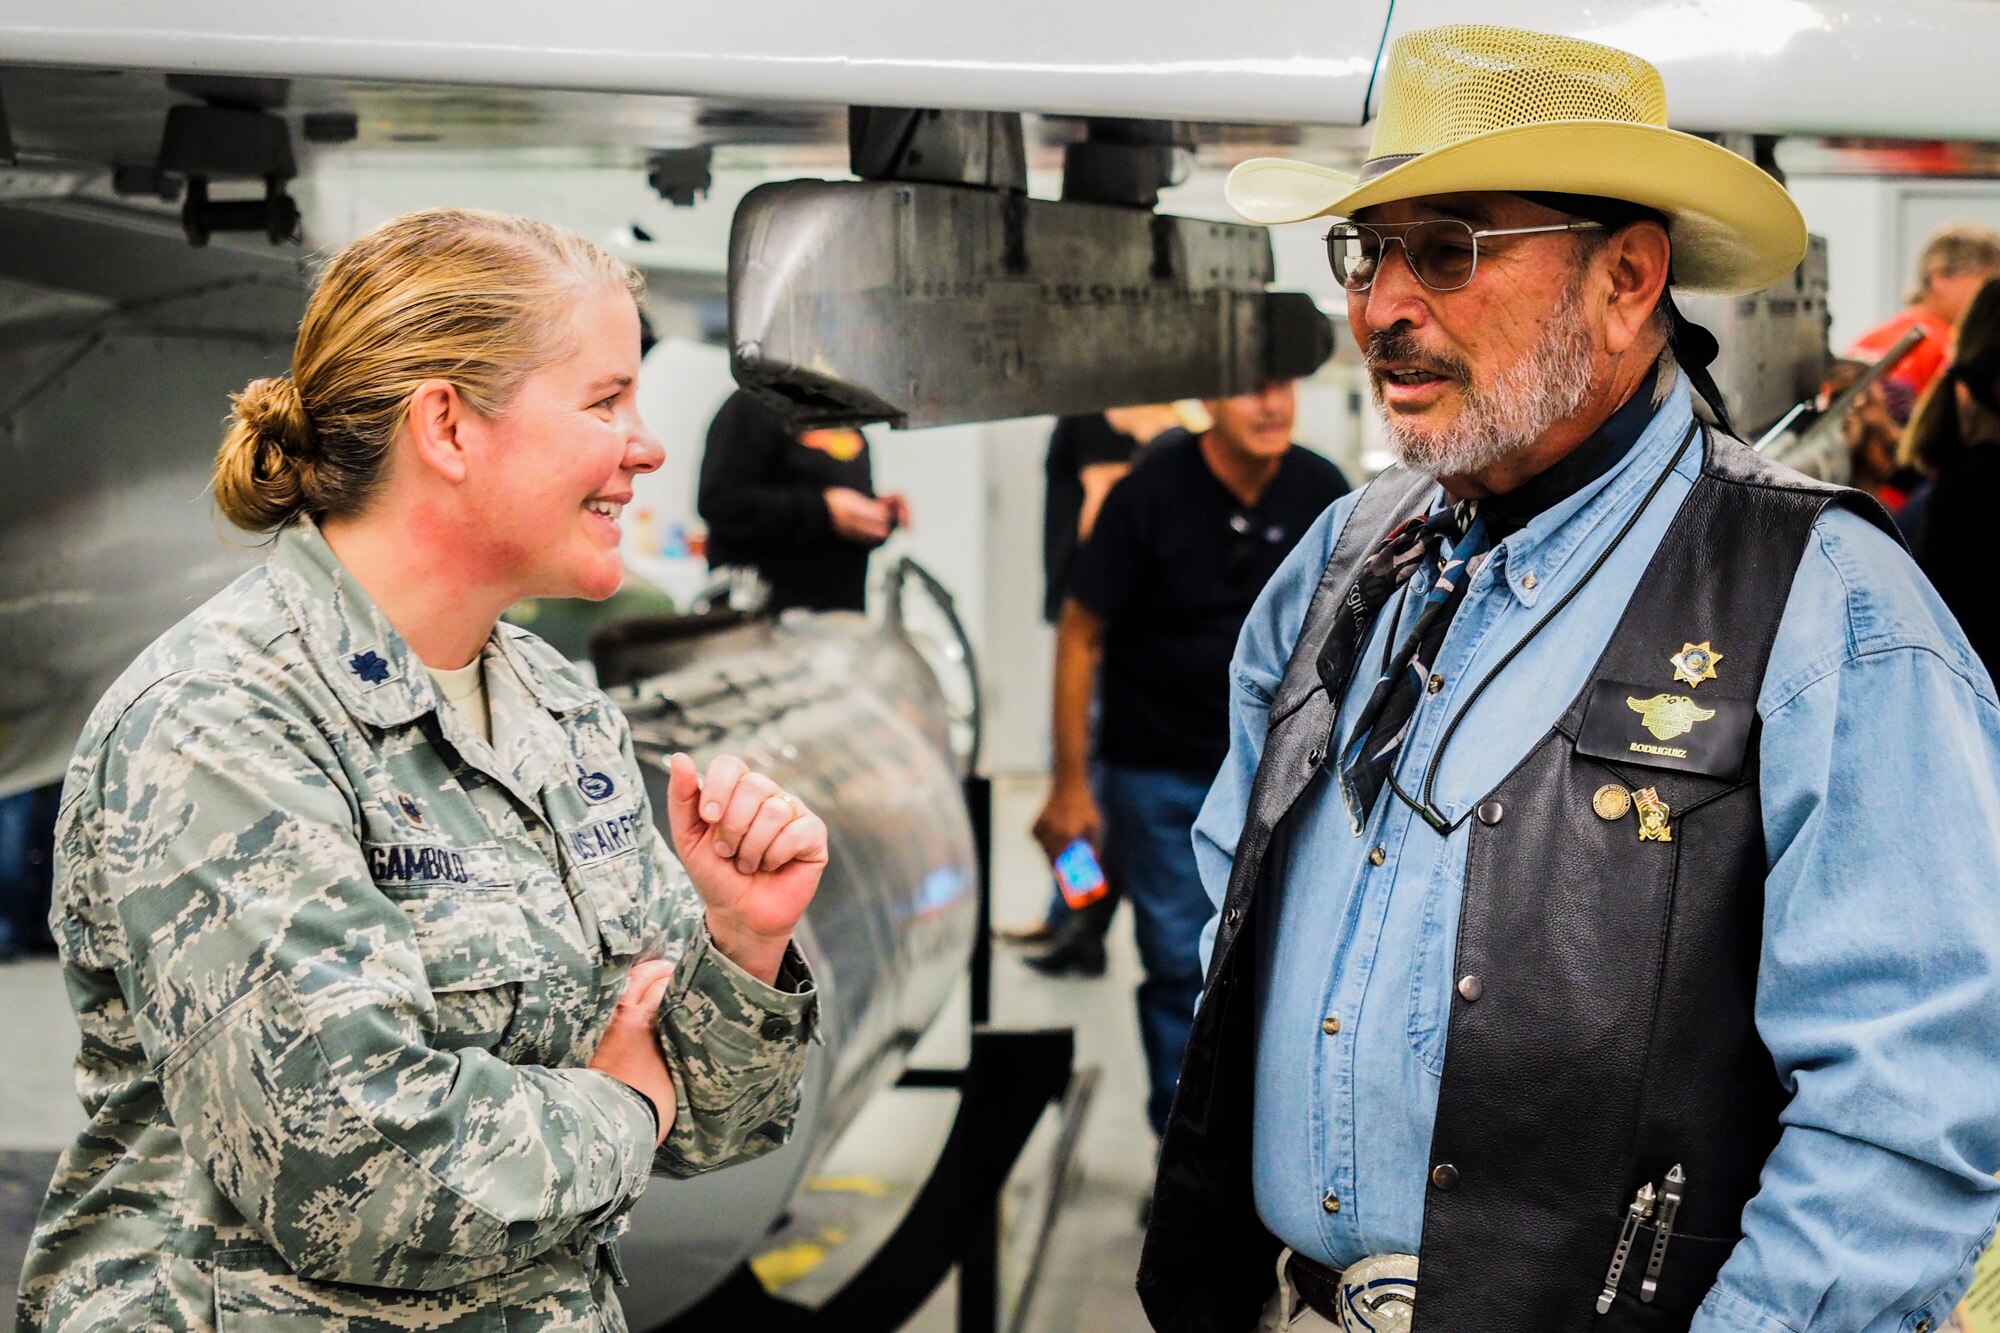 Lt. Col. Catherine Gambold, 547th Intelligence Squadron commander, speaks with a biker at the Air Combat Command Threat Training Facility at Nellis Air Force Base, Nev., May 21, 2017. The TTF maintains weapons and equipment to be used as training aids. Now that the TTF is open to the public, visitors can view anything from MiG fighter jets, to rocket propelled grenades. (U.S. Air Force photo by Master Sgt. Heidi West/Released)